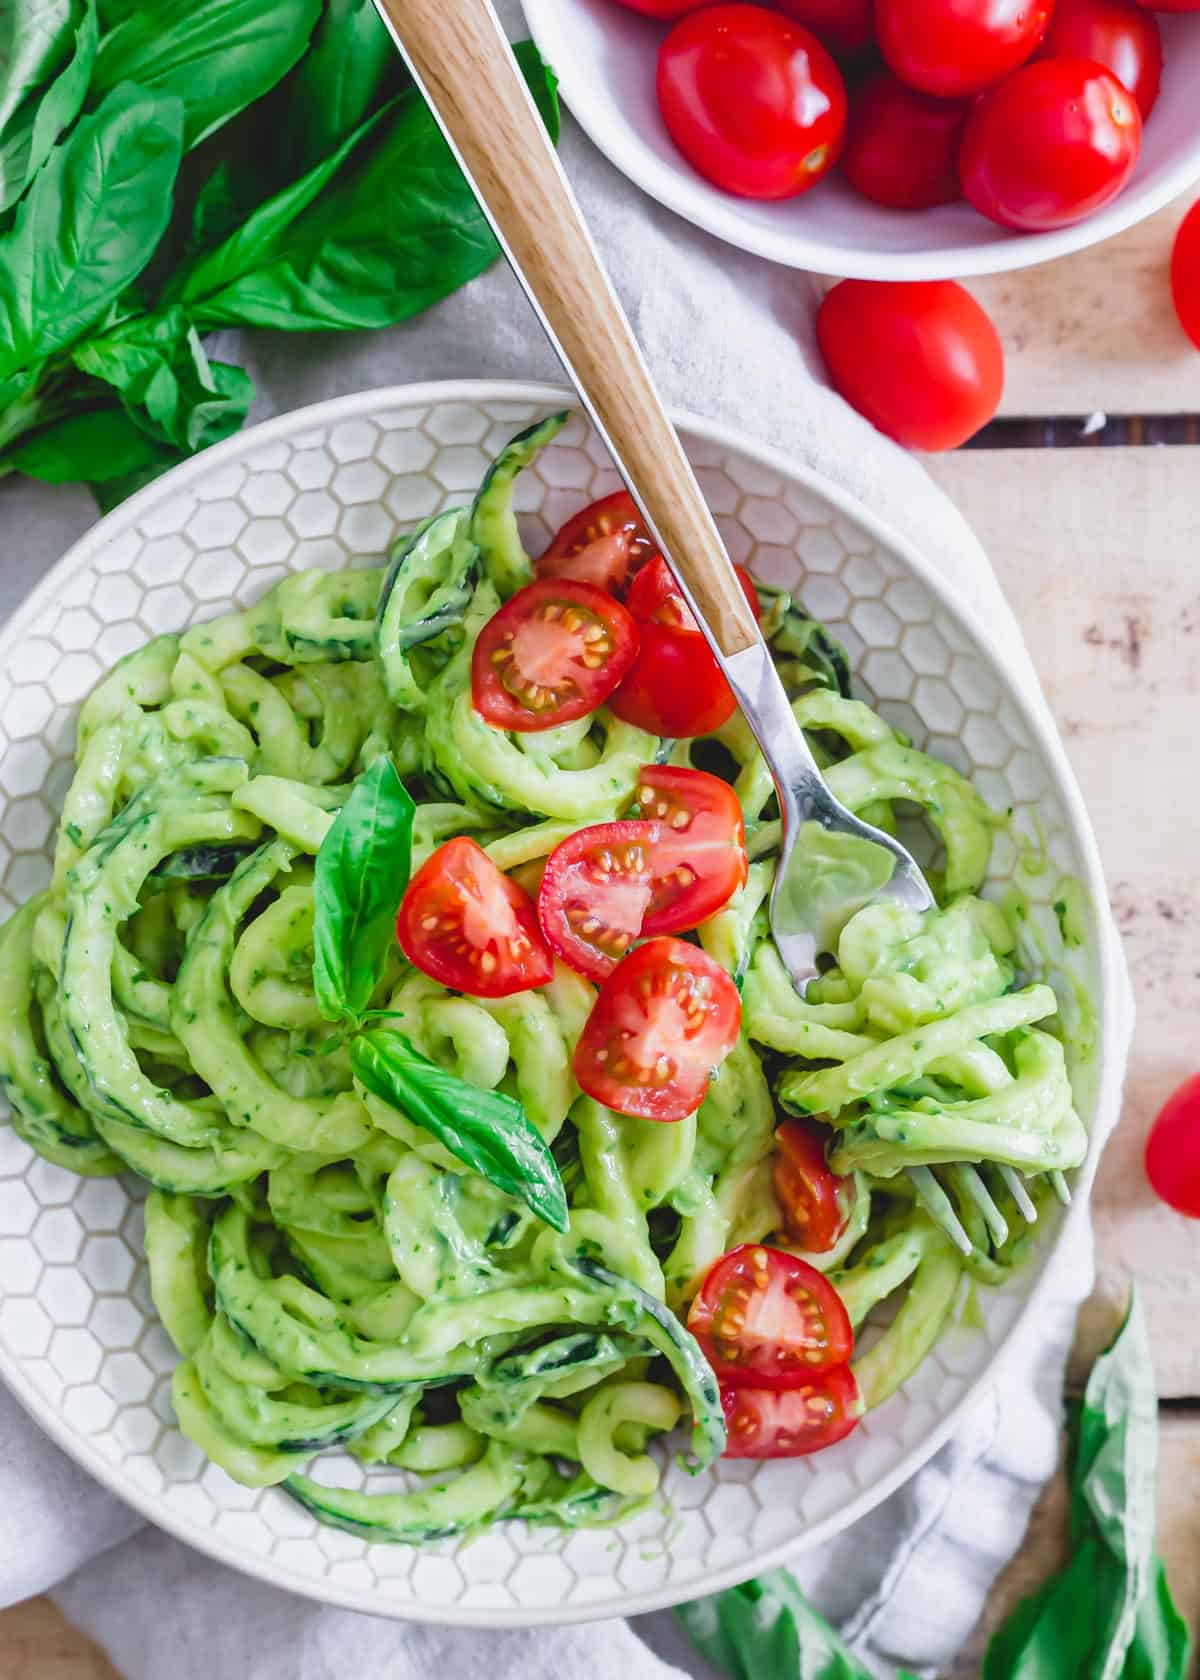 Zucchini noodles coated in a creamy avocado sauce twirled around a fork in a bowl.